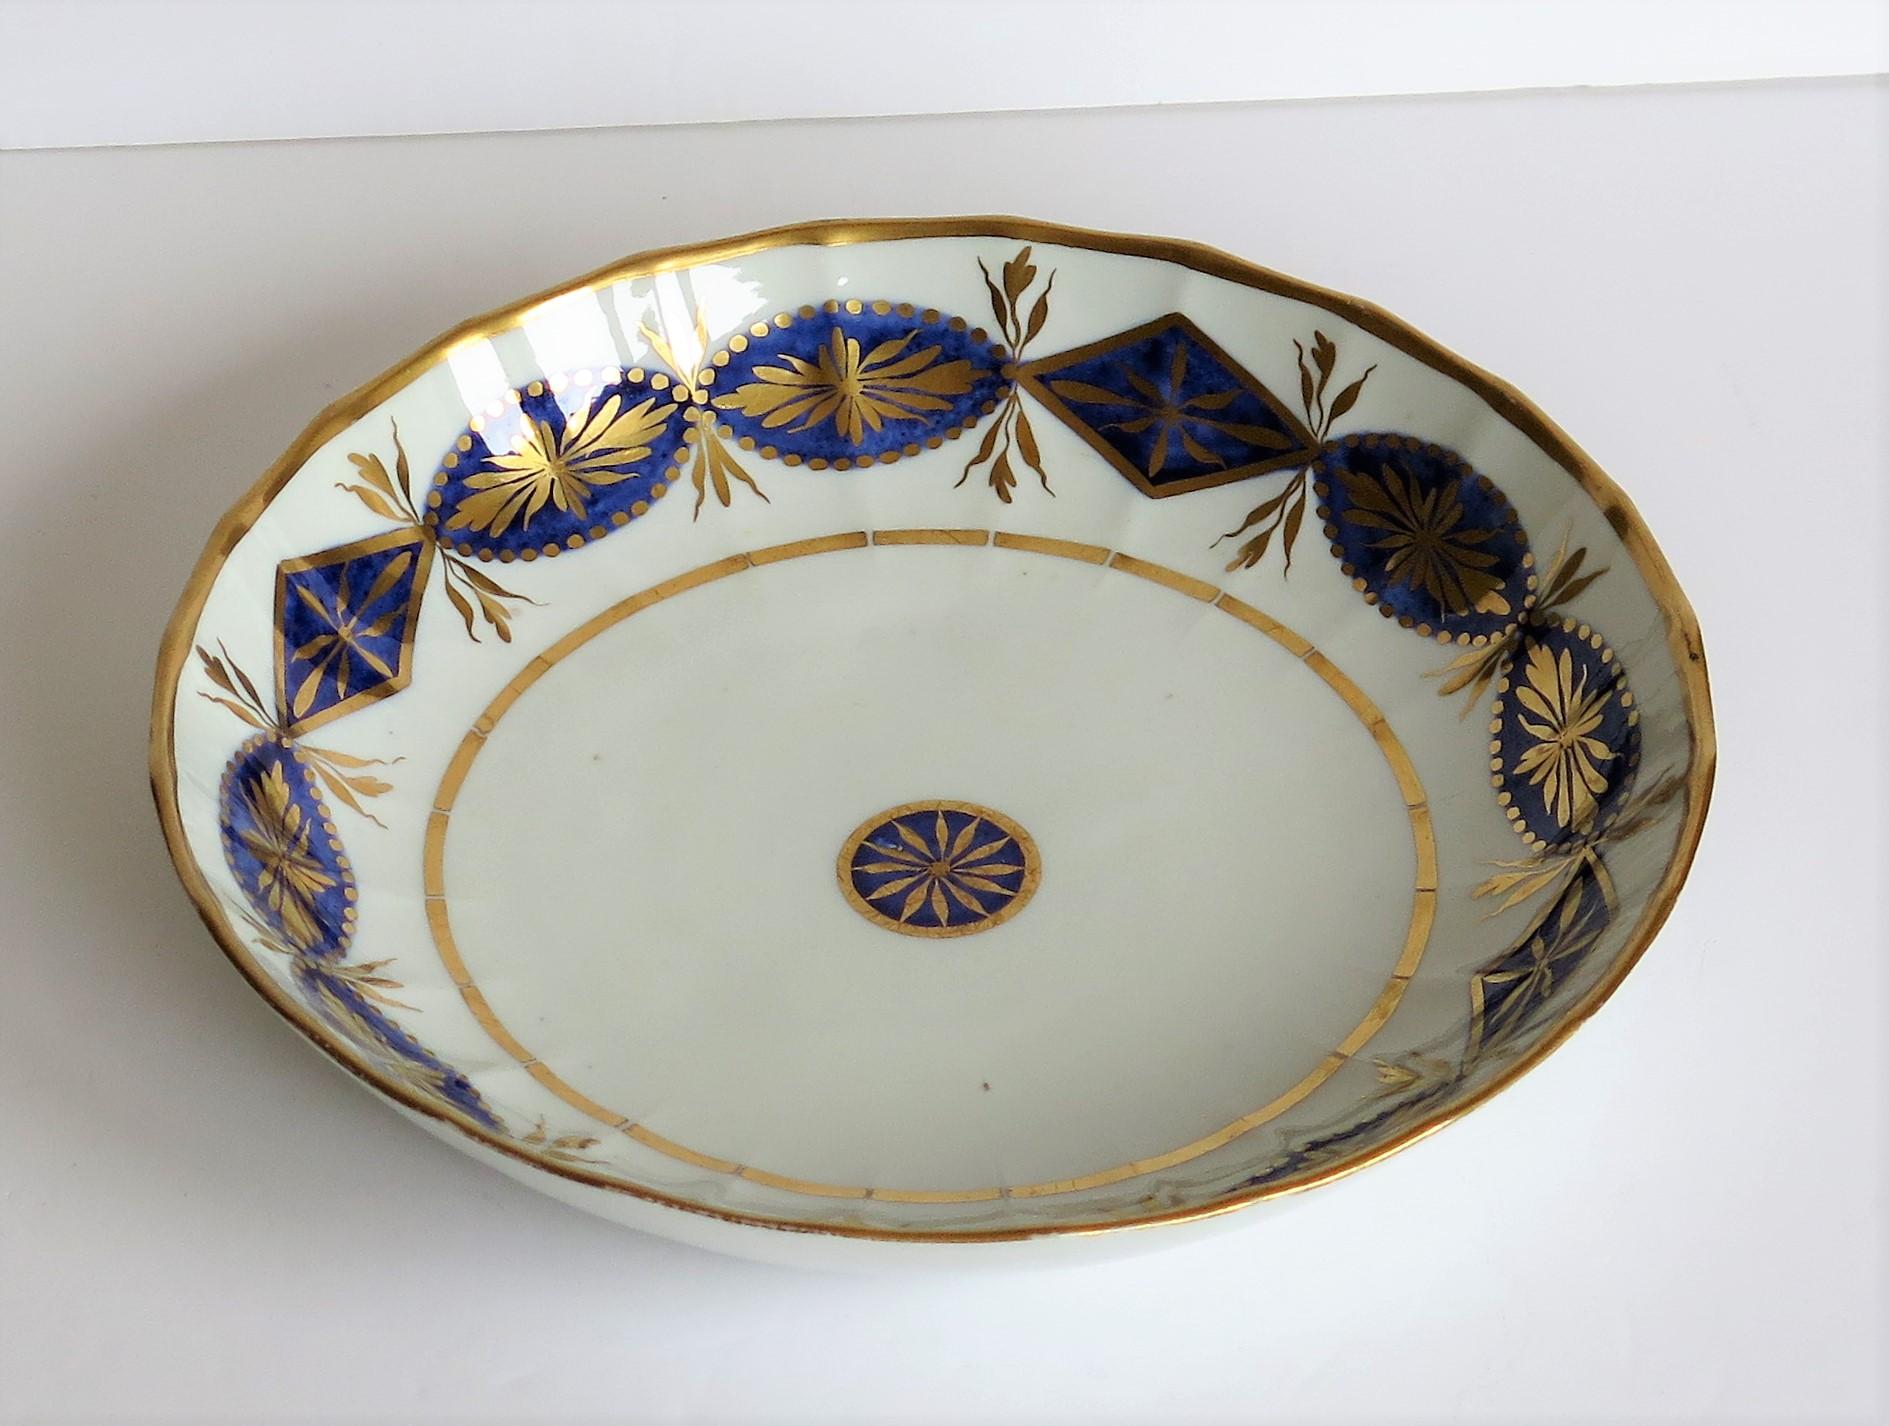 This is a porcelain, hand painted and gilded deep plate or saucer dish made by Miles Mason (Mason's), Staffordshire Potteries, England in the very early years of the 19th century, George III period, circa 1805.

This dish, sometimes called a spoon